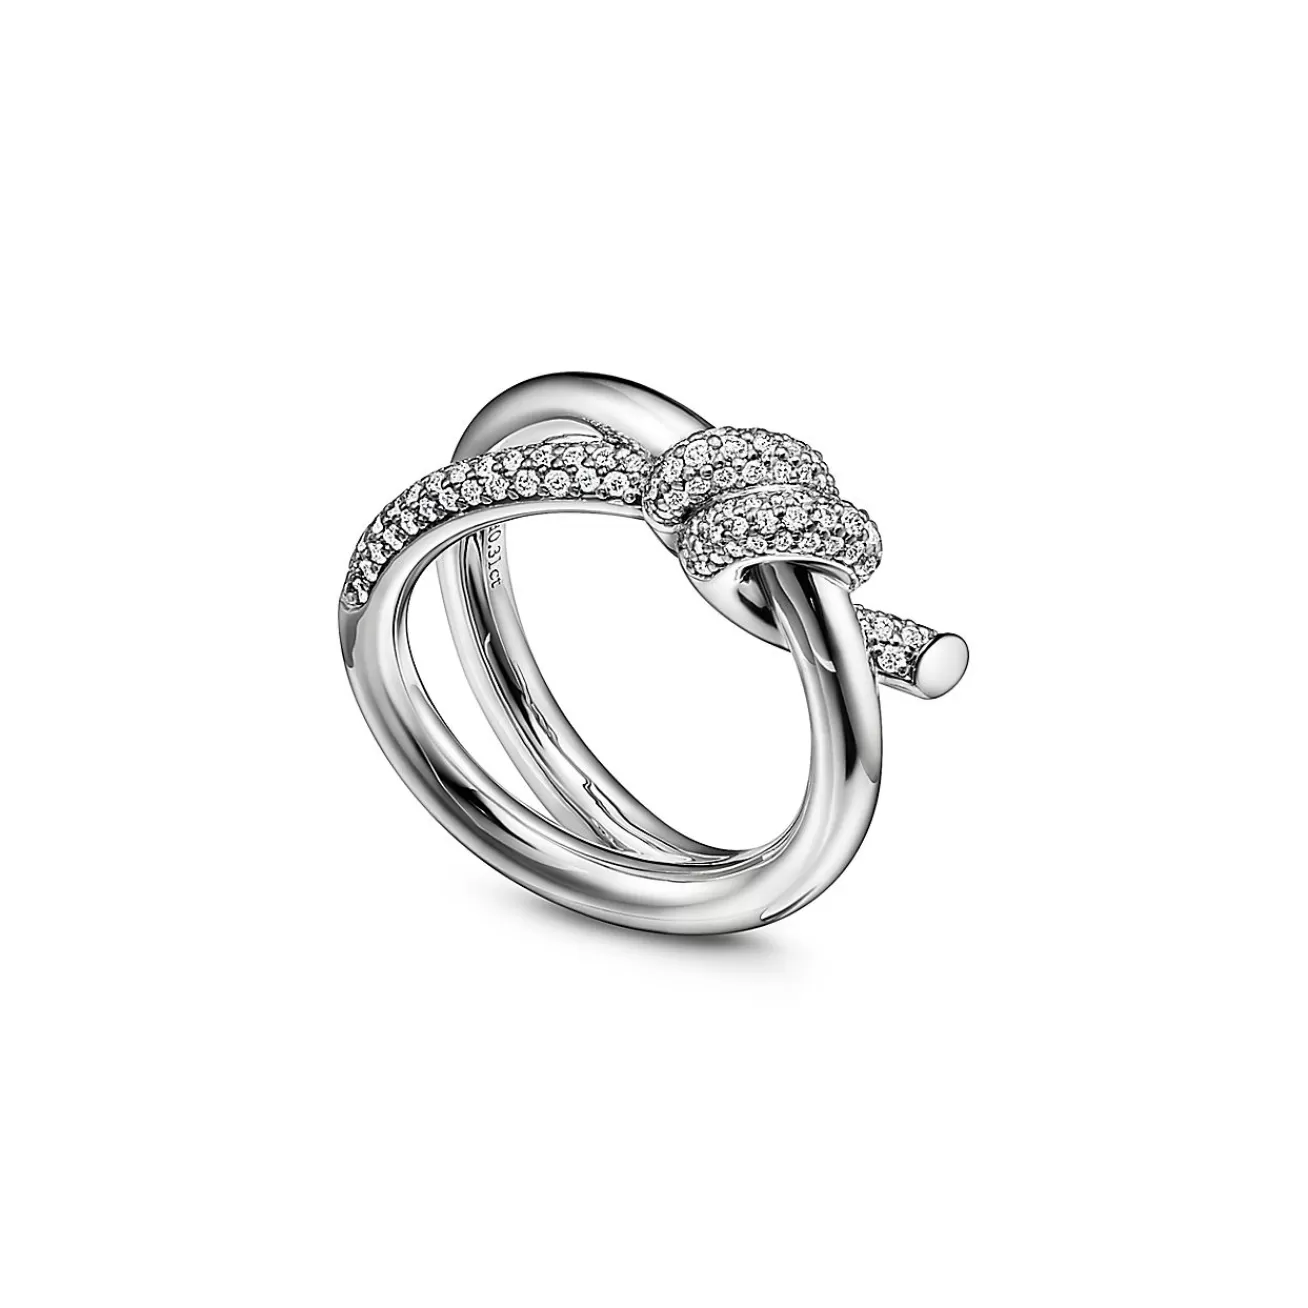 Tiffany & Co. Tiffany Knot Double Row Ring in White Gold with Diamonds | ^ Rings | Men's Jewelry